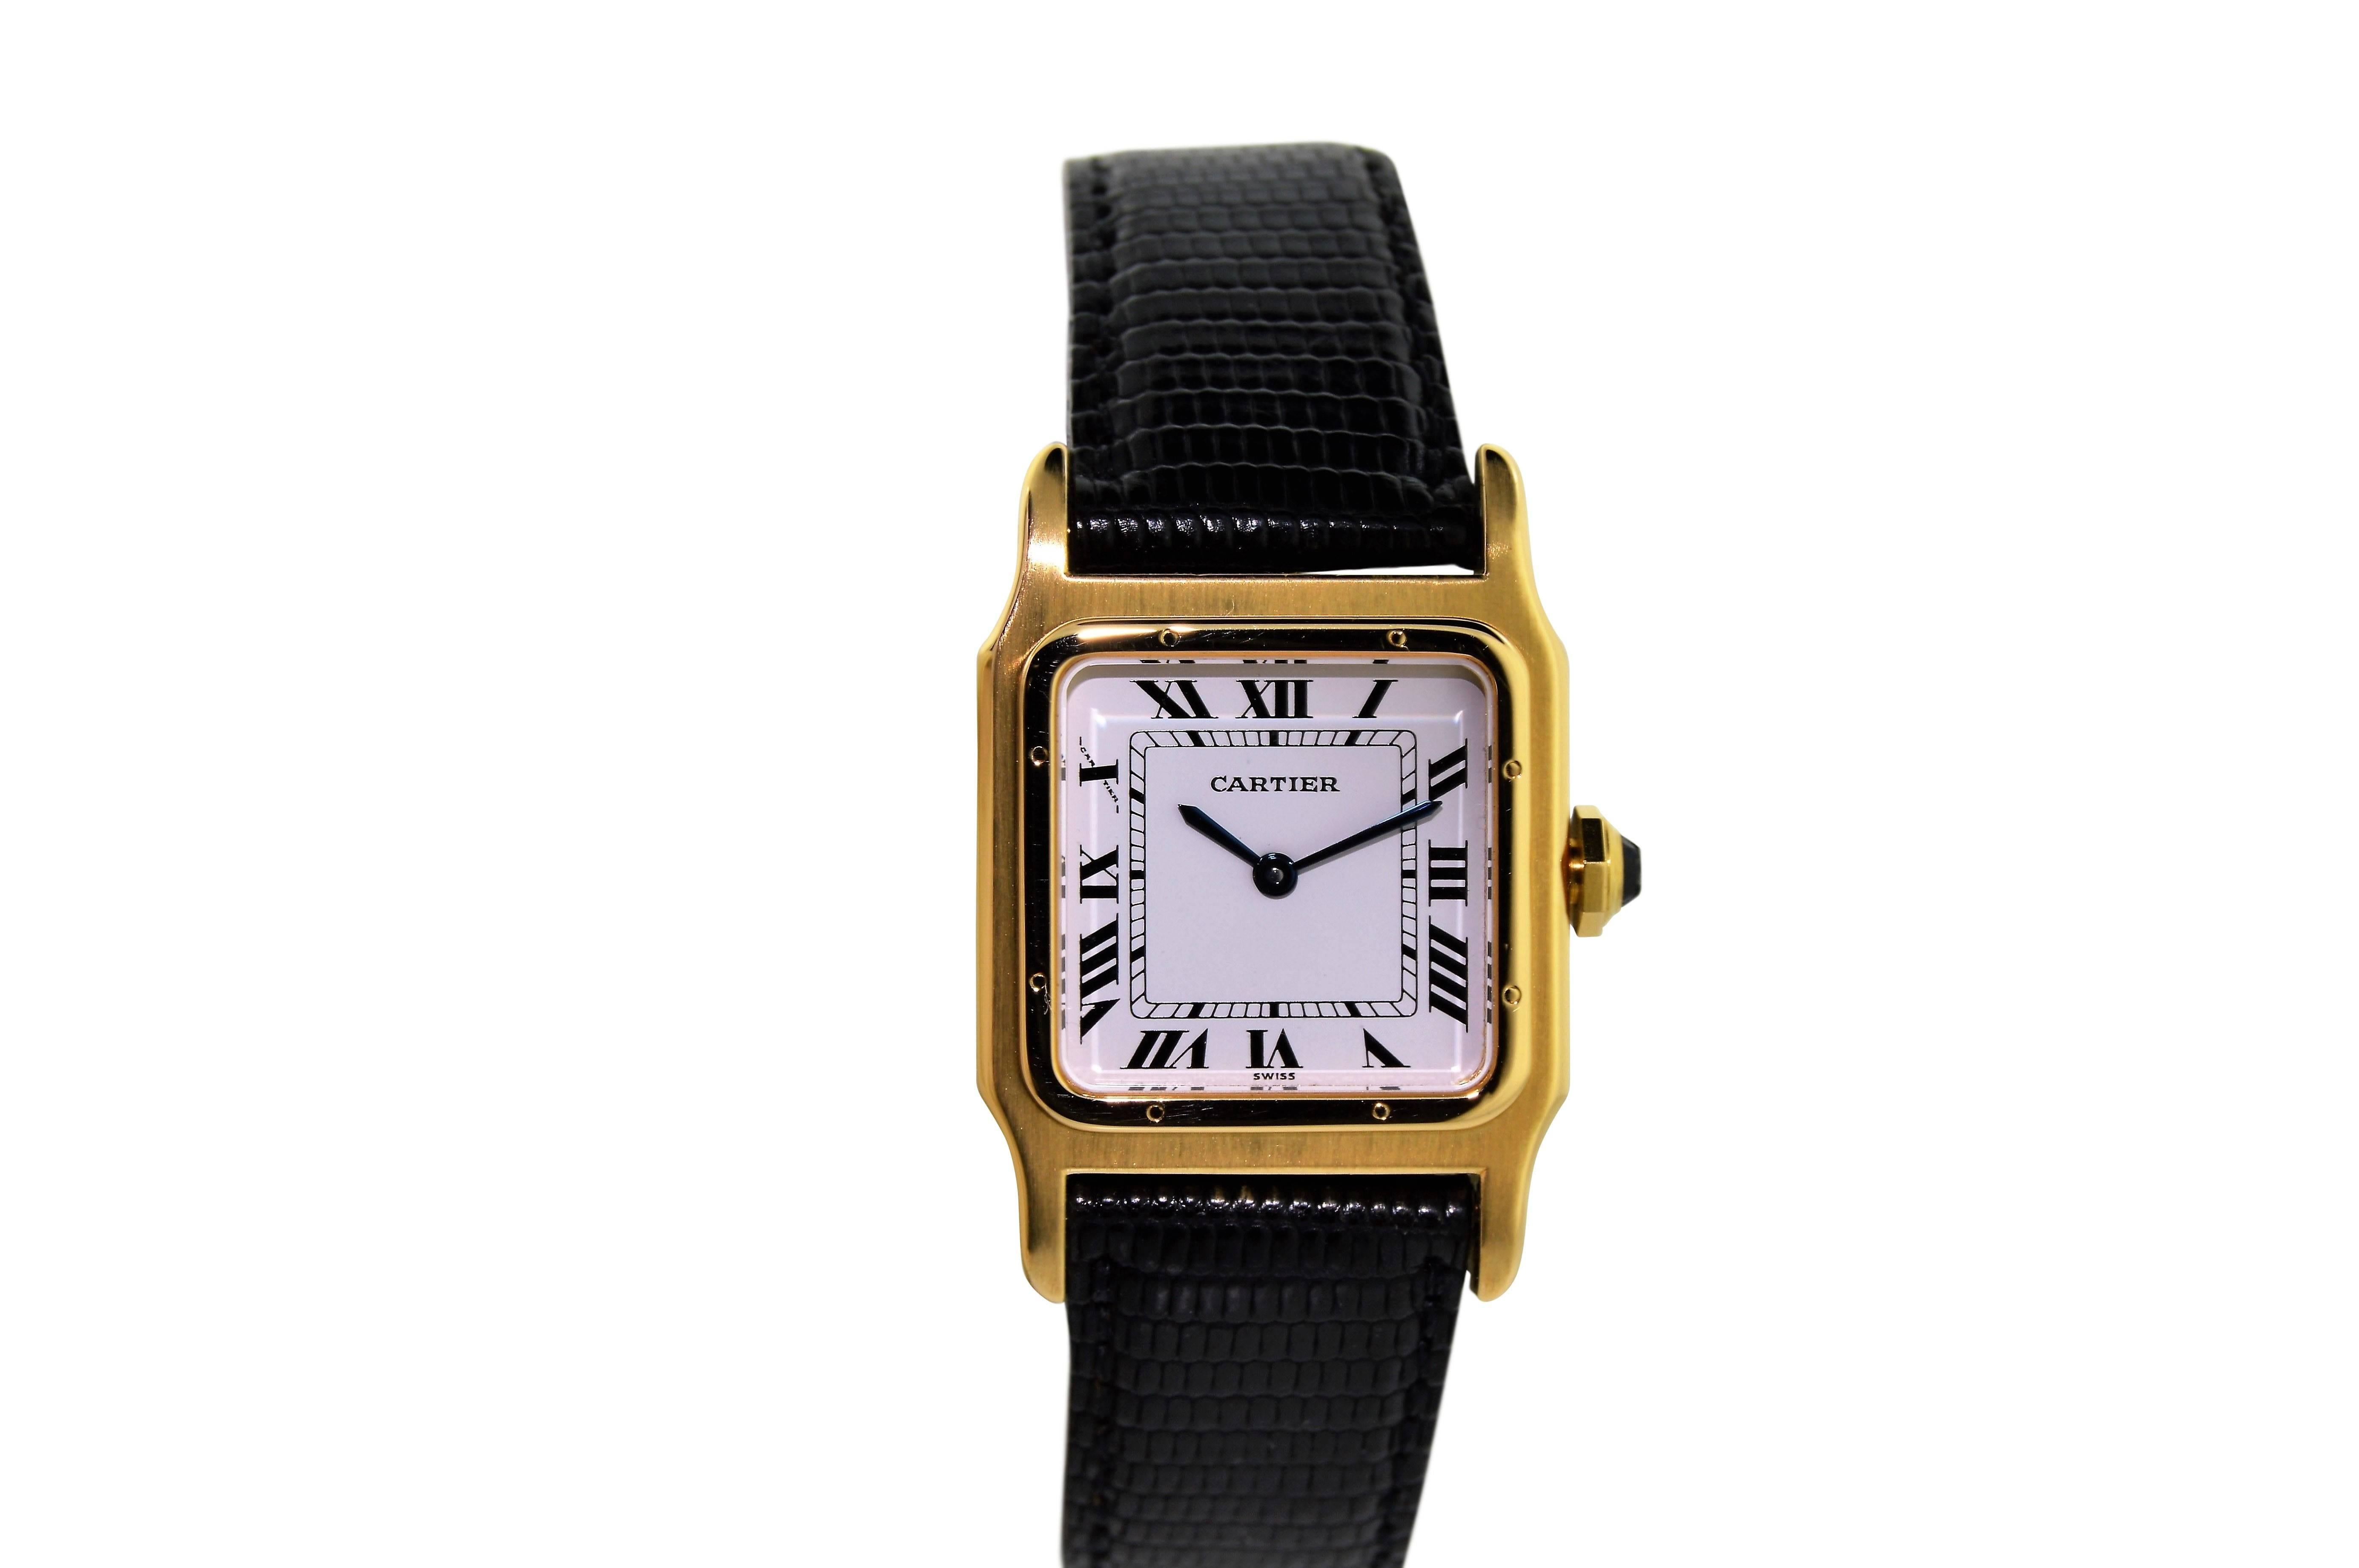 FACTORY / HOUSE: Cartier Watch Company
STYLE / REFERENCE: Santos Dumont 
METAL / MATERIAL: 18 Kt. Yellow Gold  
DIMENSIONS:  35mm  X  25mm
CIRCA: 1970's
MOVEMENT / CALIBER: Manual Winding / 17 Jewels
DIAL / HANDS: Original Roman / Blued Steel Leaf